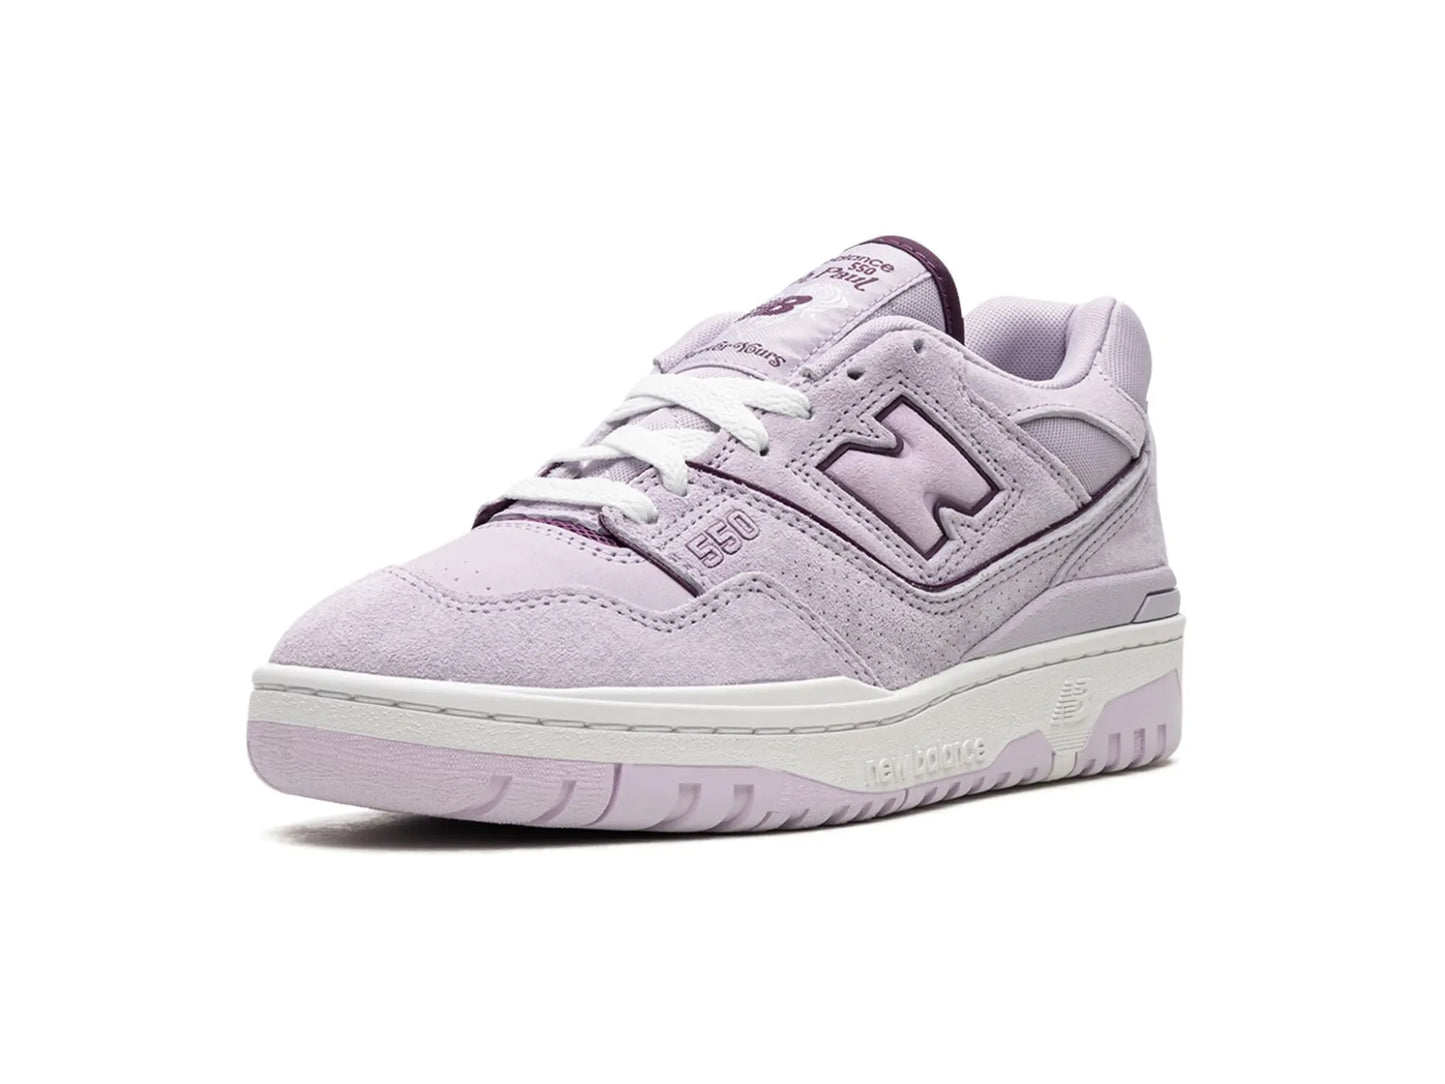 NB 550 - Rich Paul 'Forever Yours'